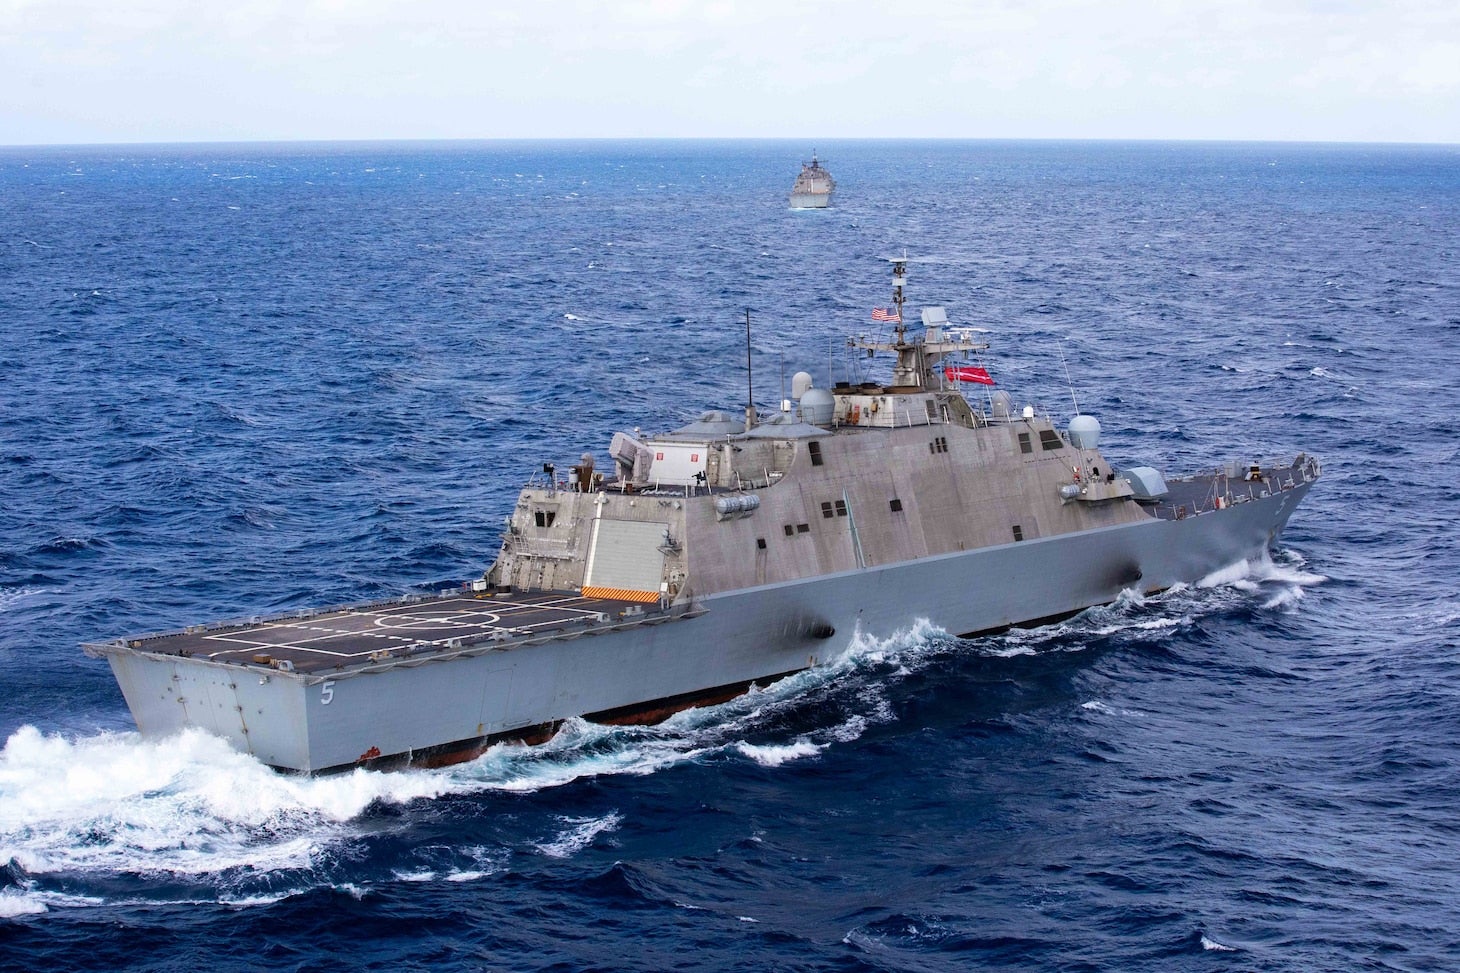 The USS Milwaukee is stranded in port at Guantanamo Bay after a Covid outbreak